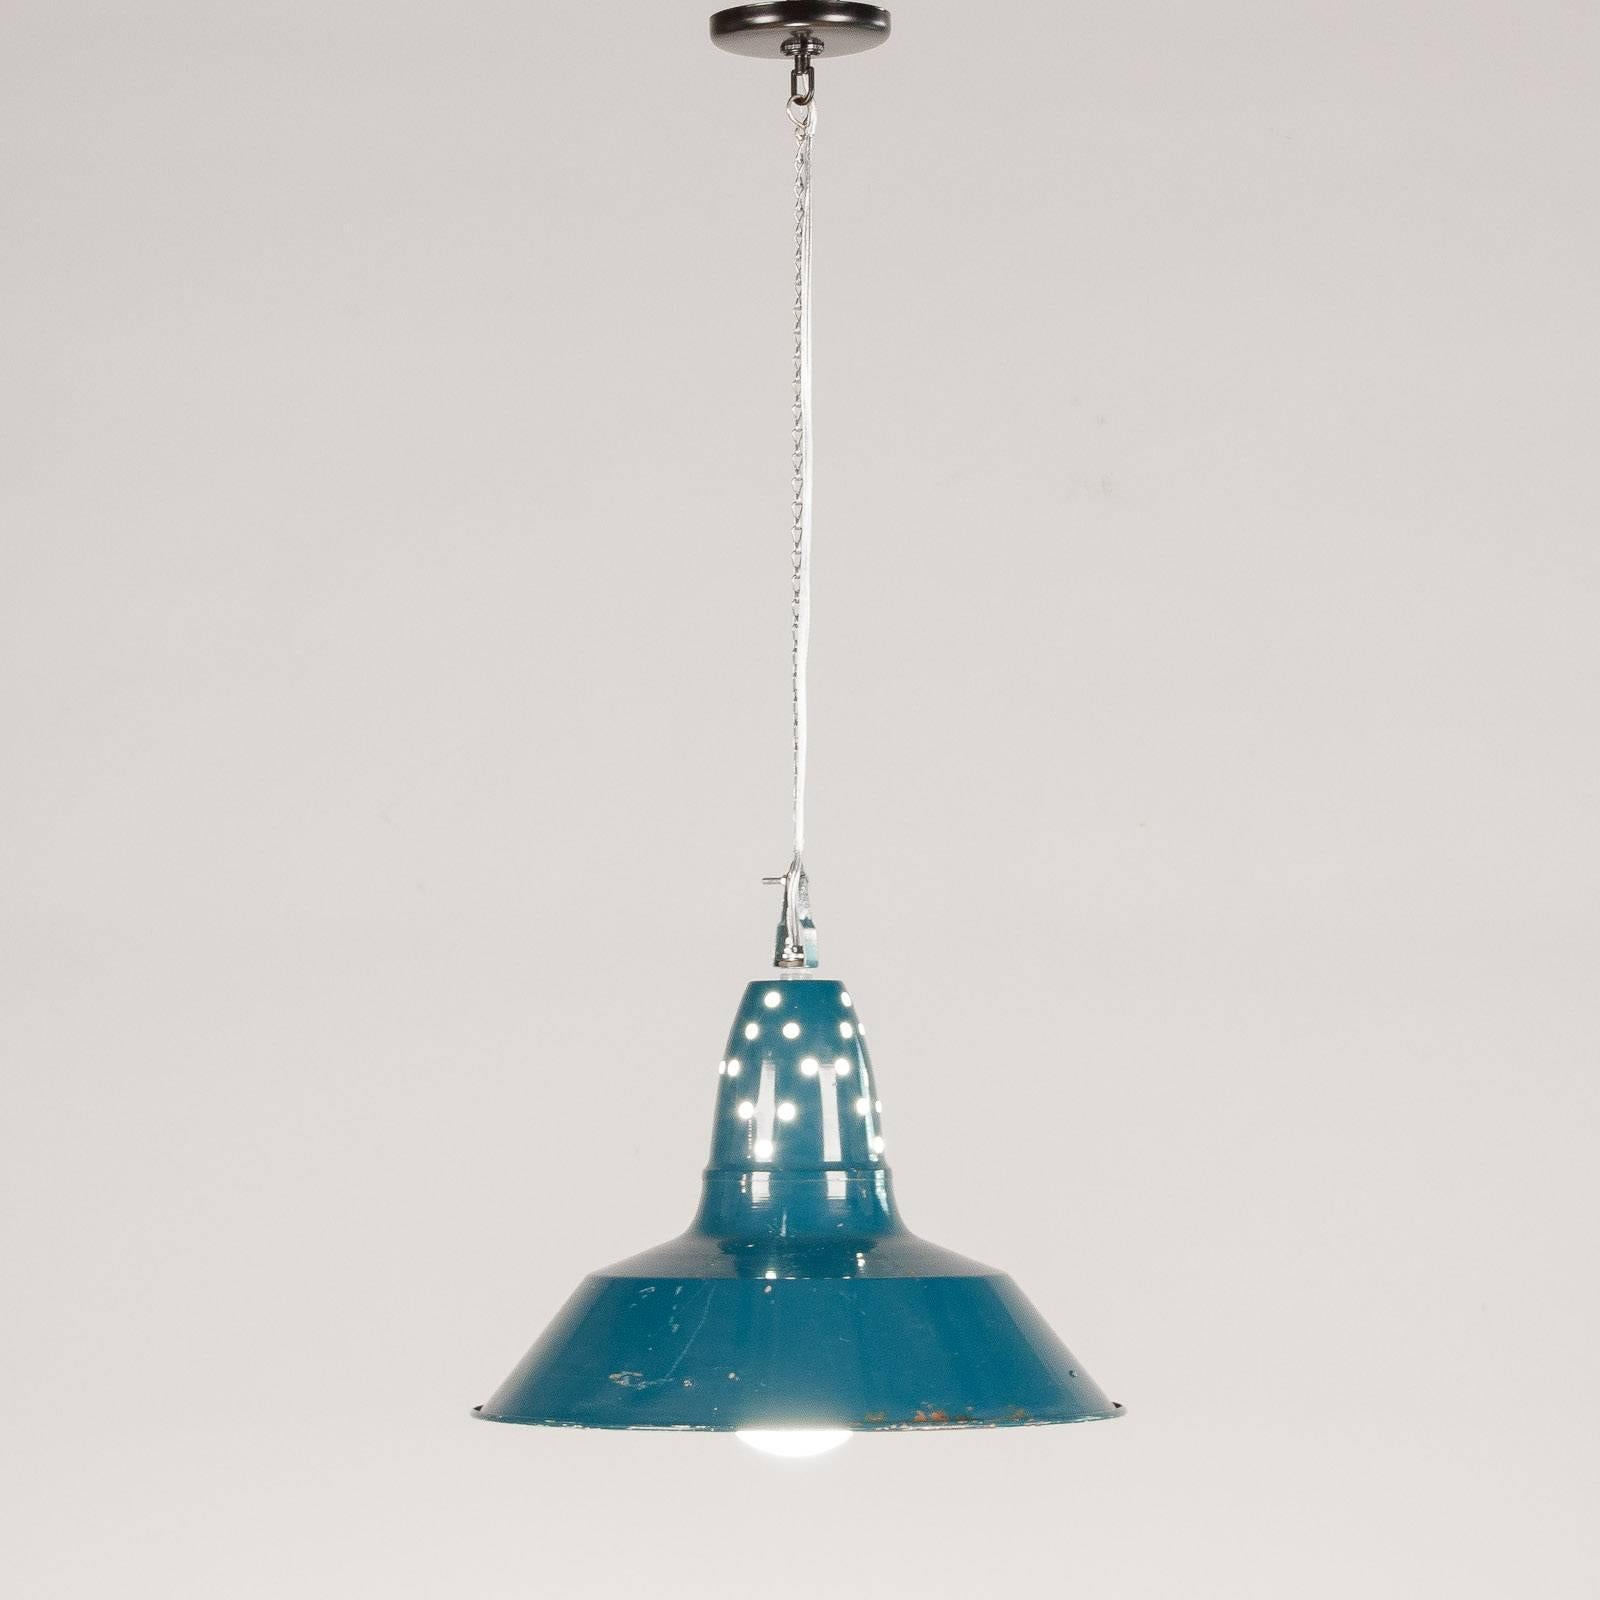 Mid-20th Century French Industrial Metal Suspension Light, 1950s For Sale